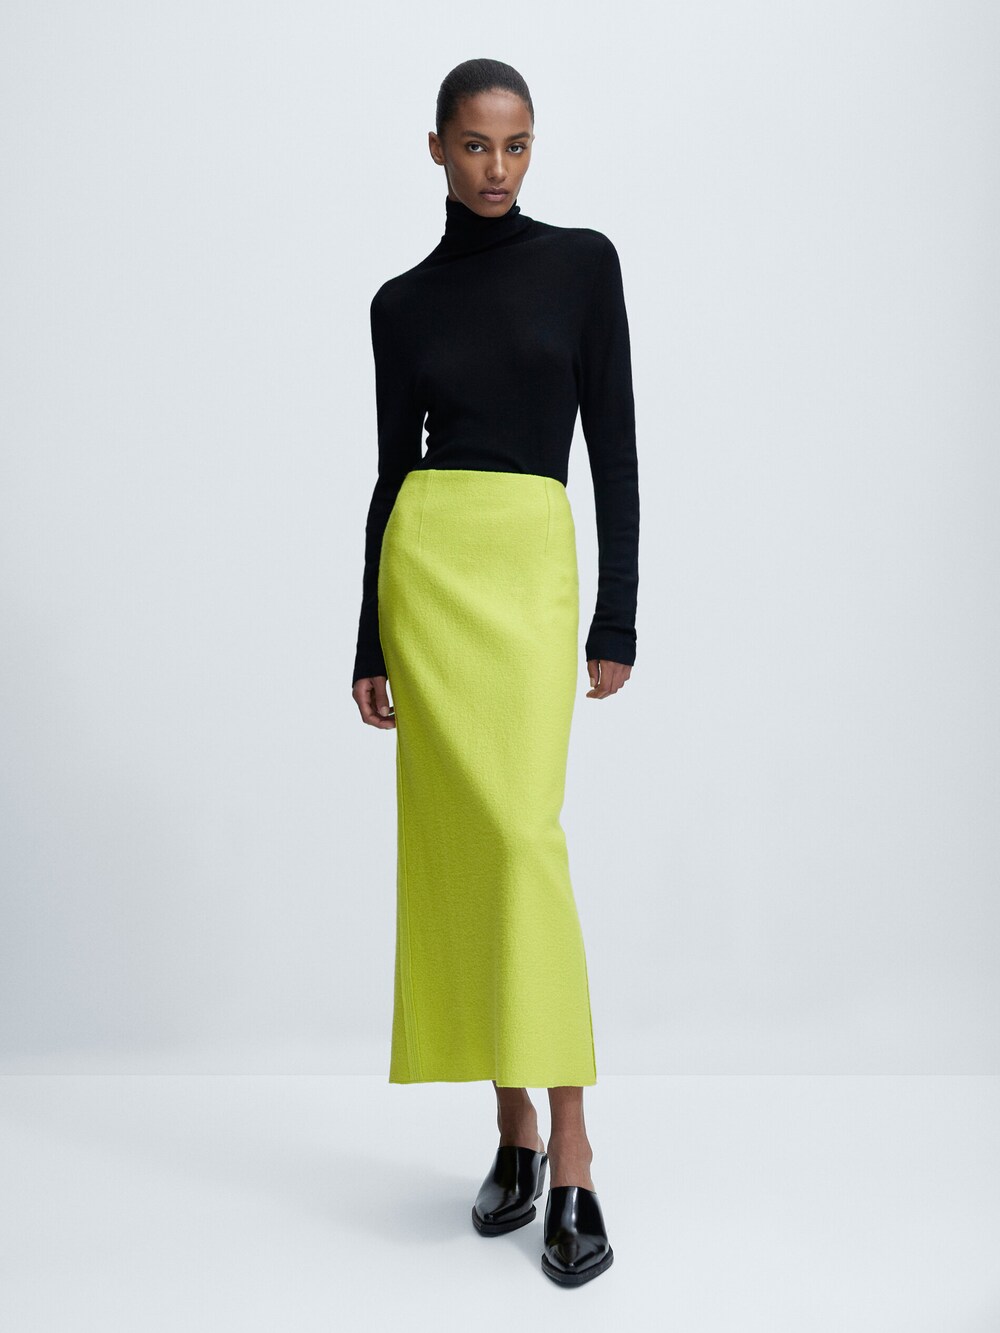 Maxi Skirts are Trending in 2022 - Where Did U Get That